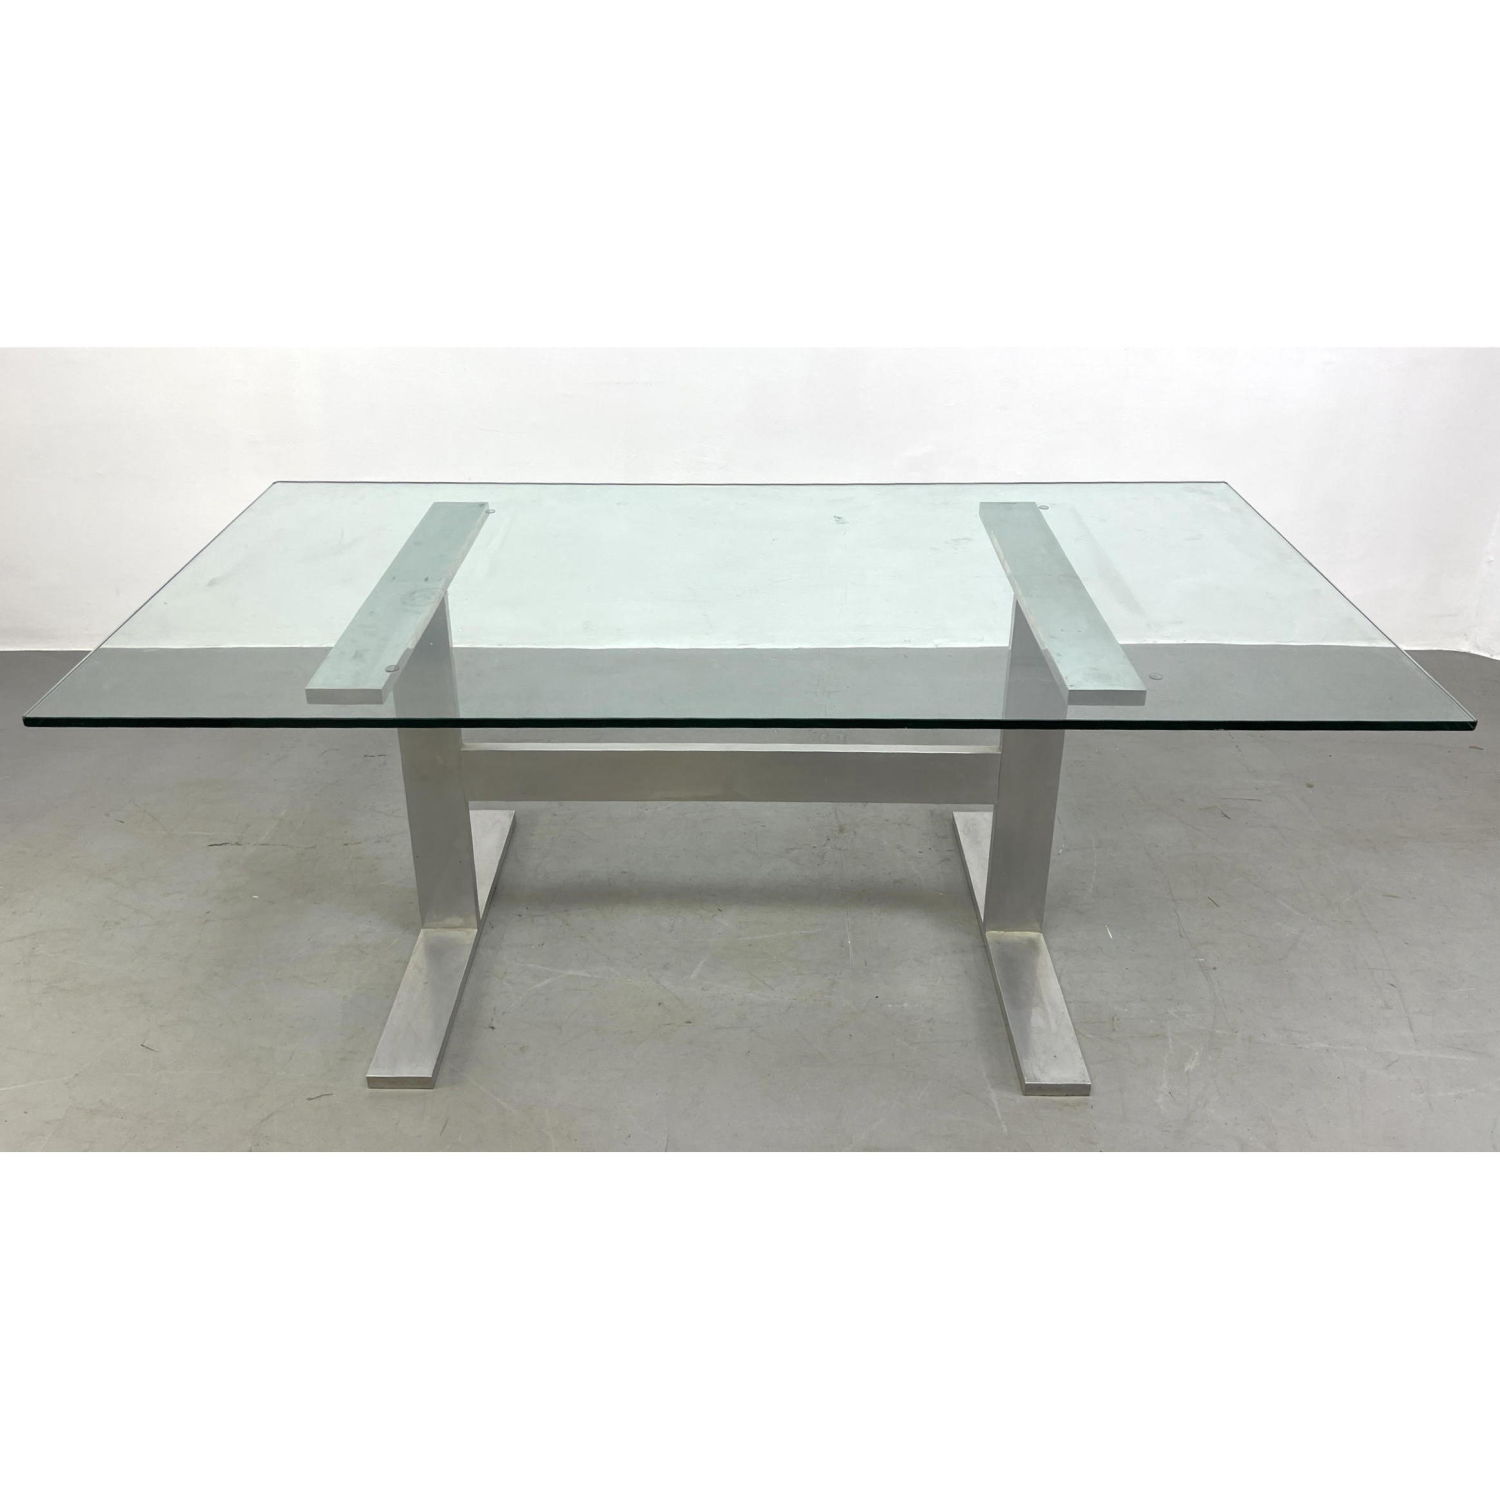 6 Glass Top Dining Table. Chrome Double